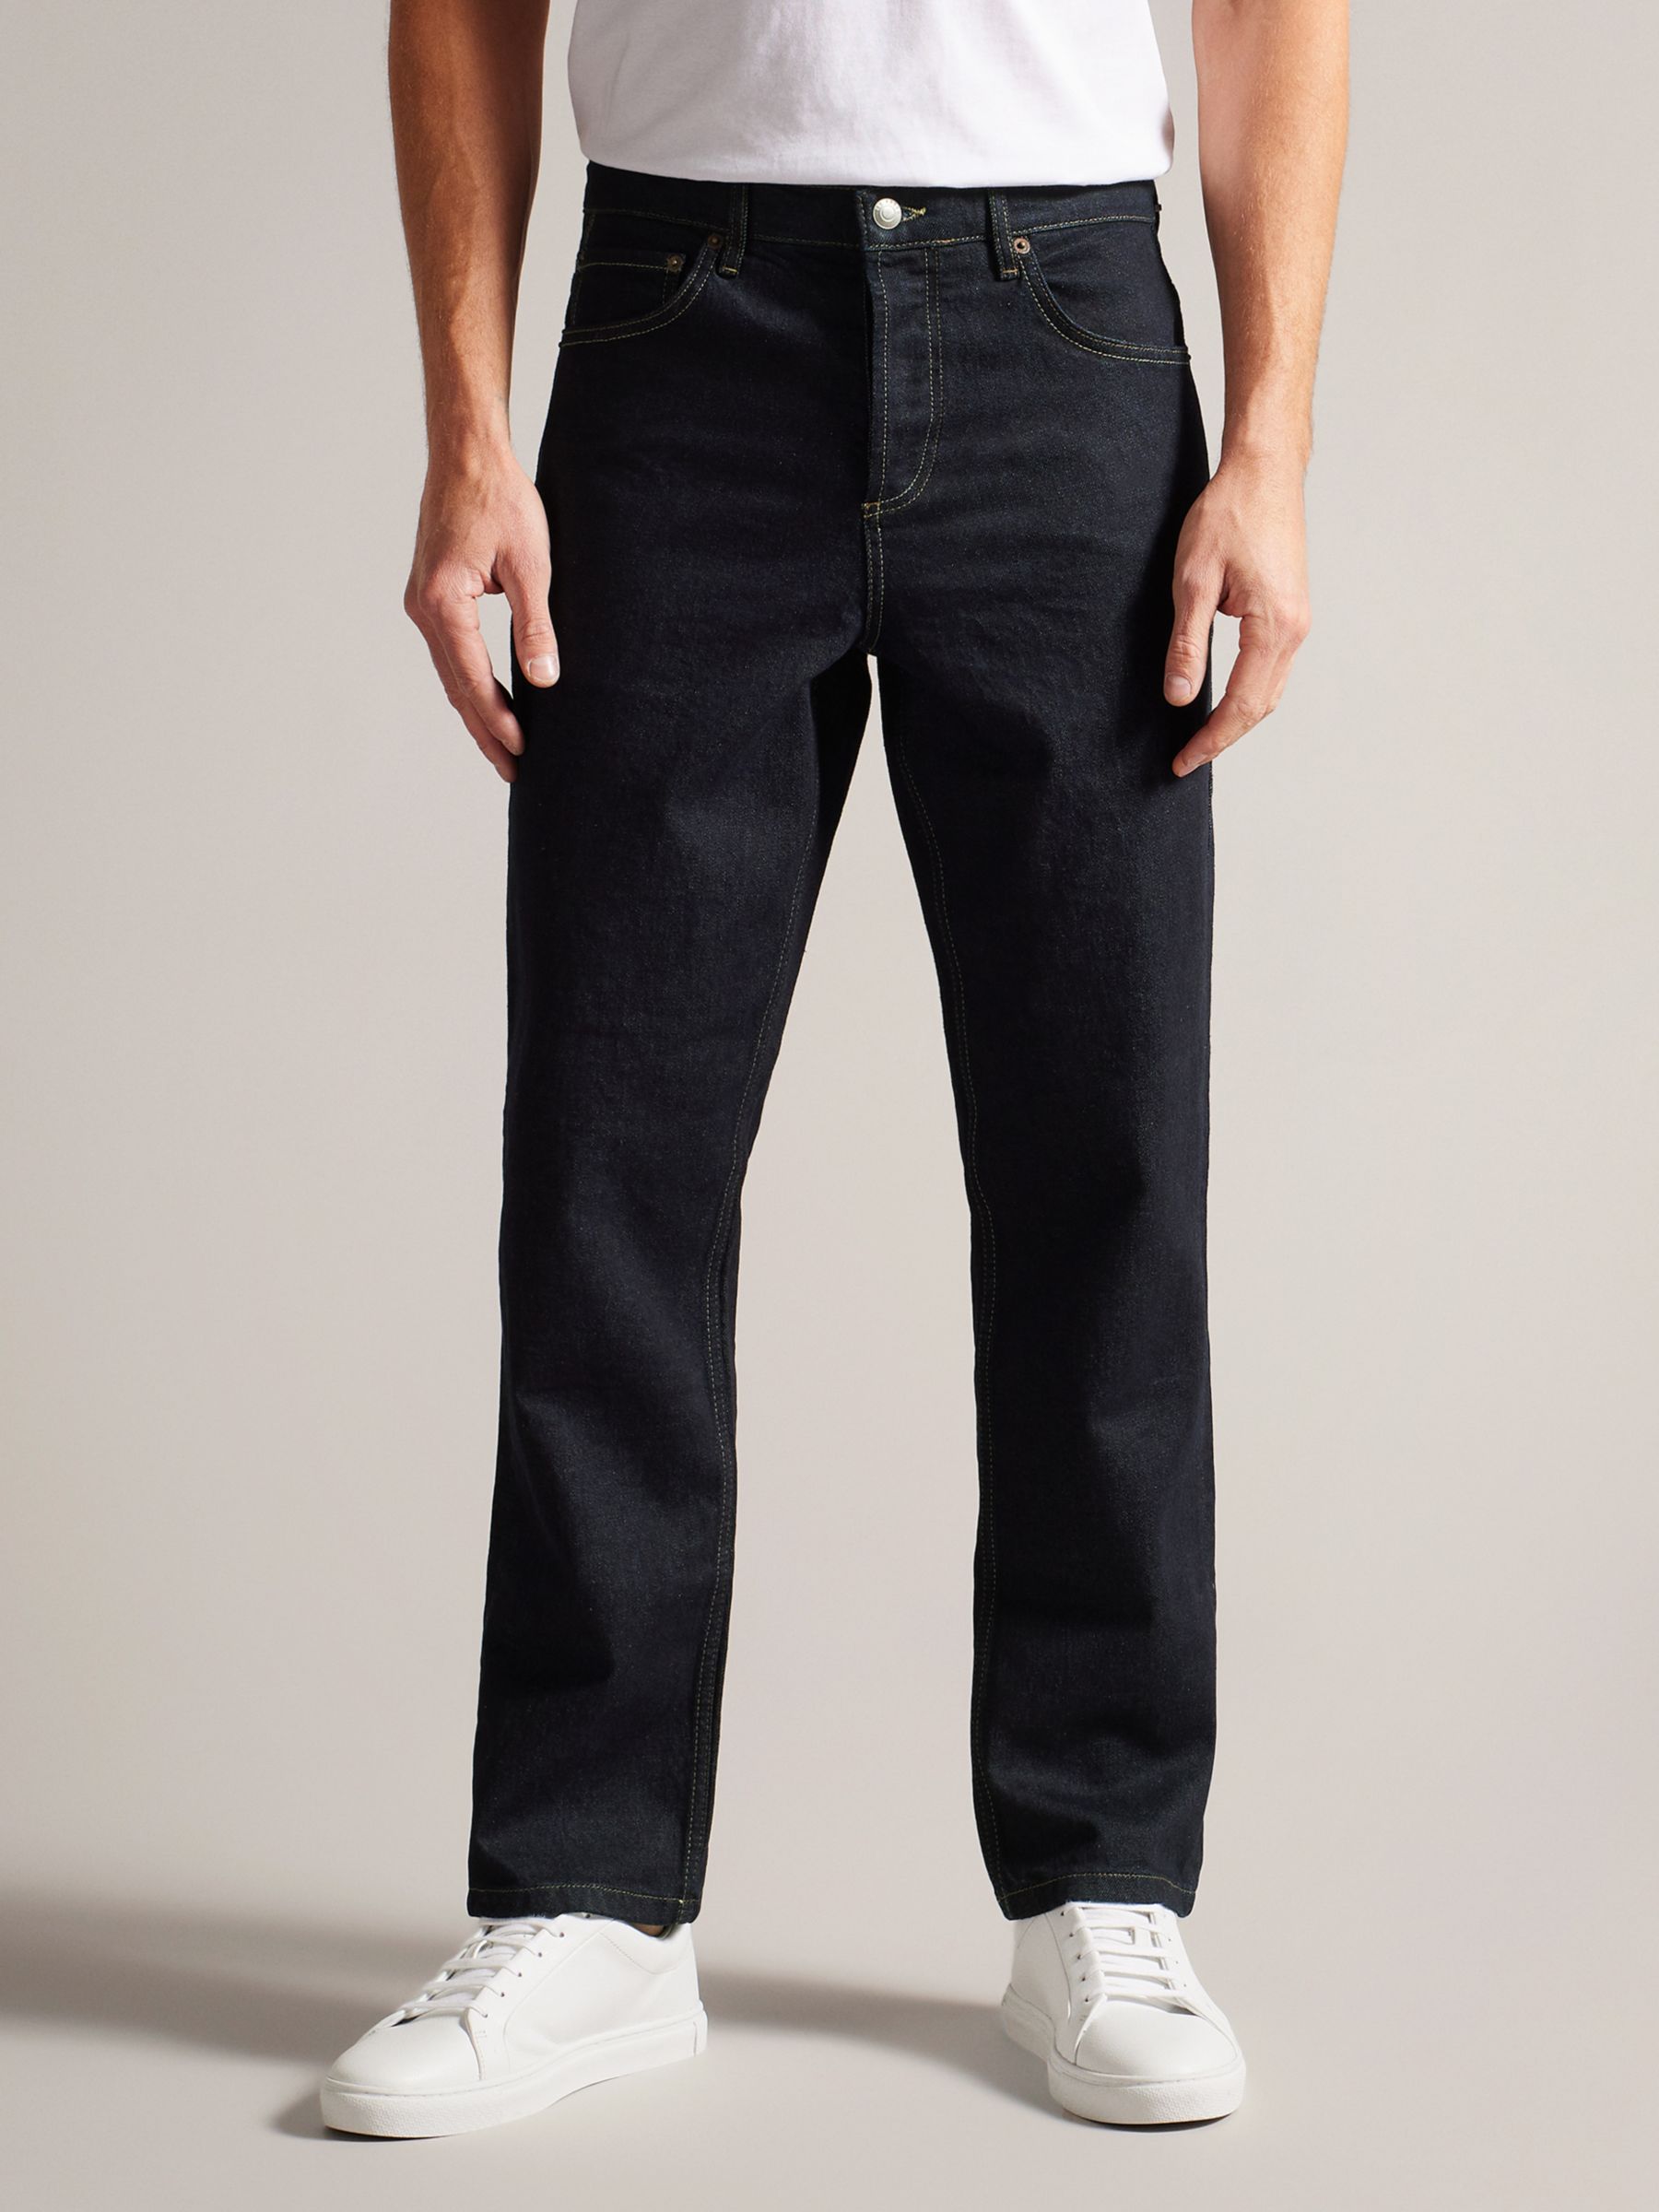 Ted Baker Joeyy Straight Fit Stretch Jeans, Dark Blue at John Lewis ...